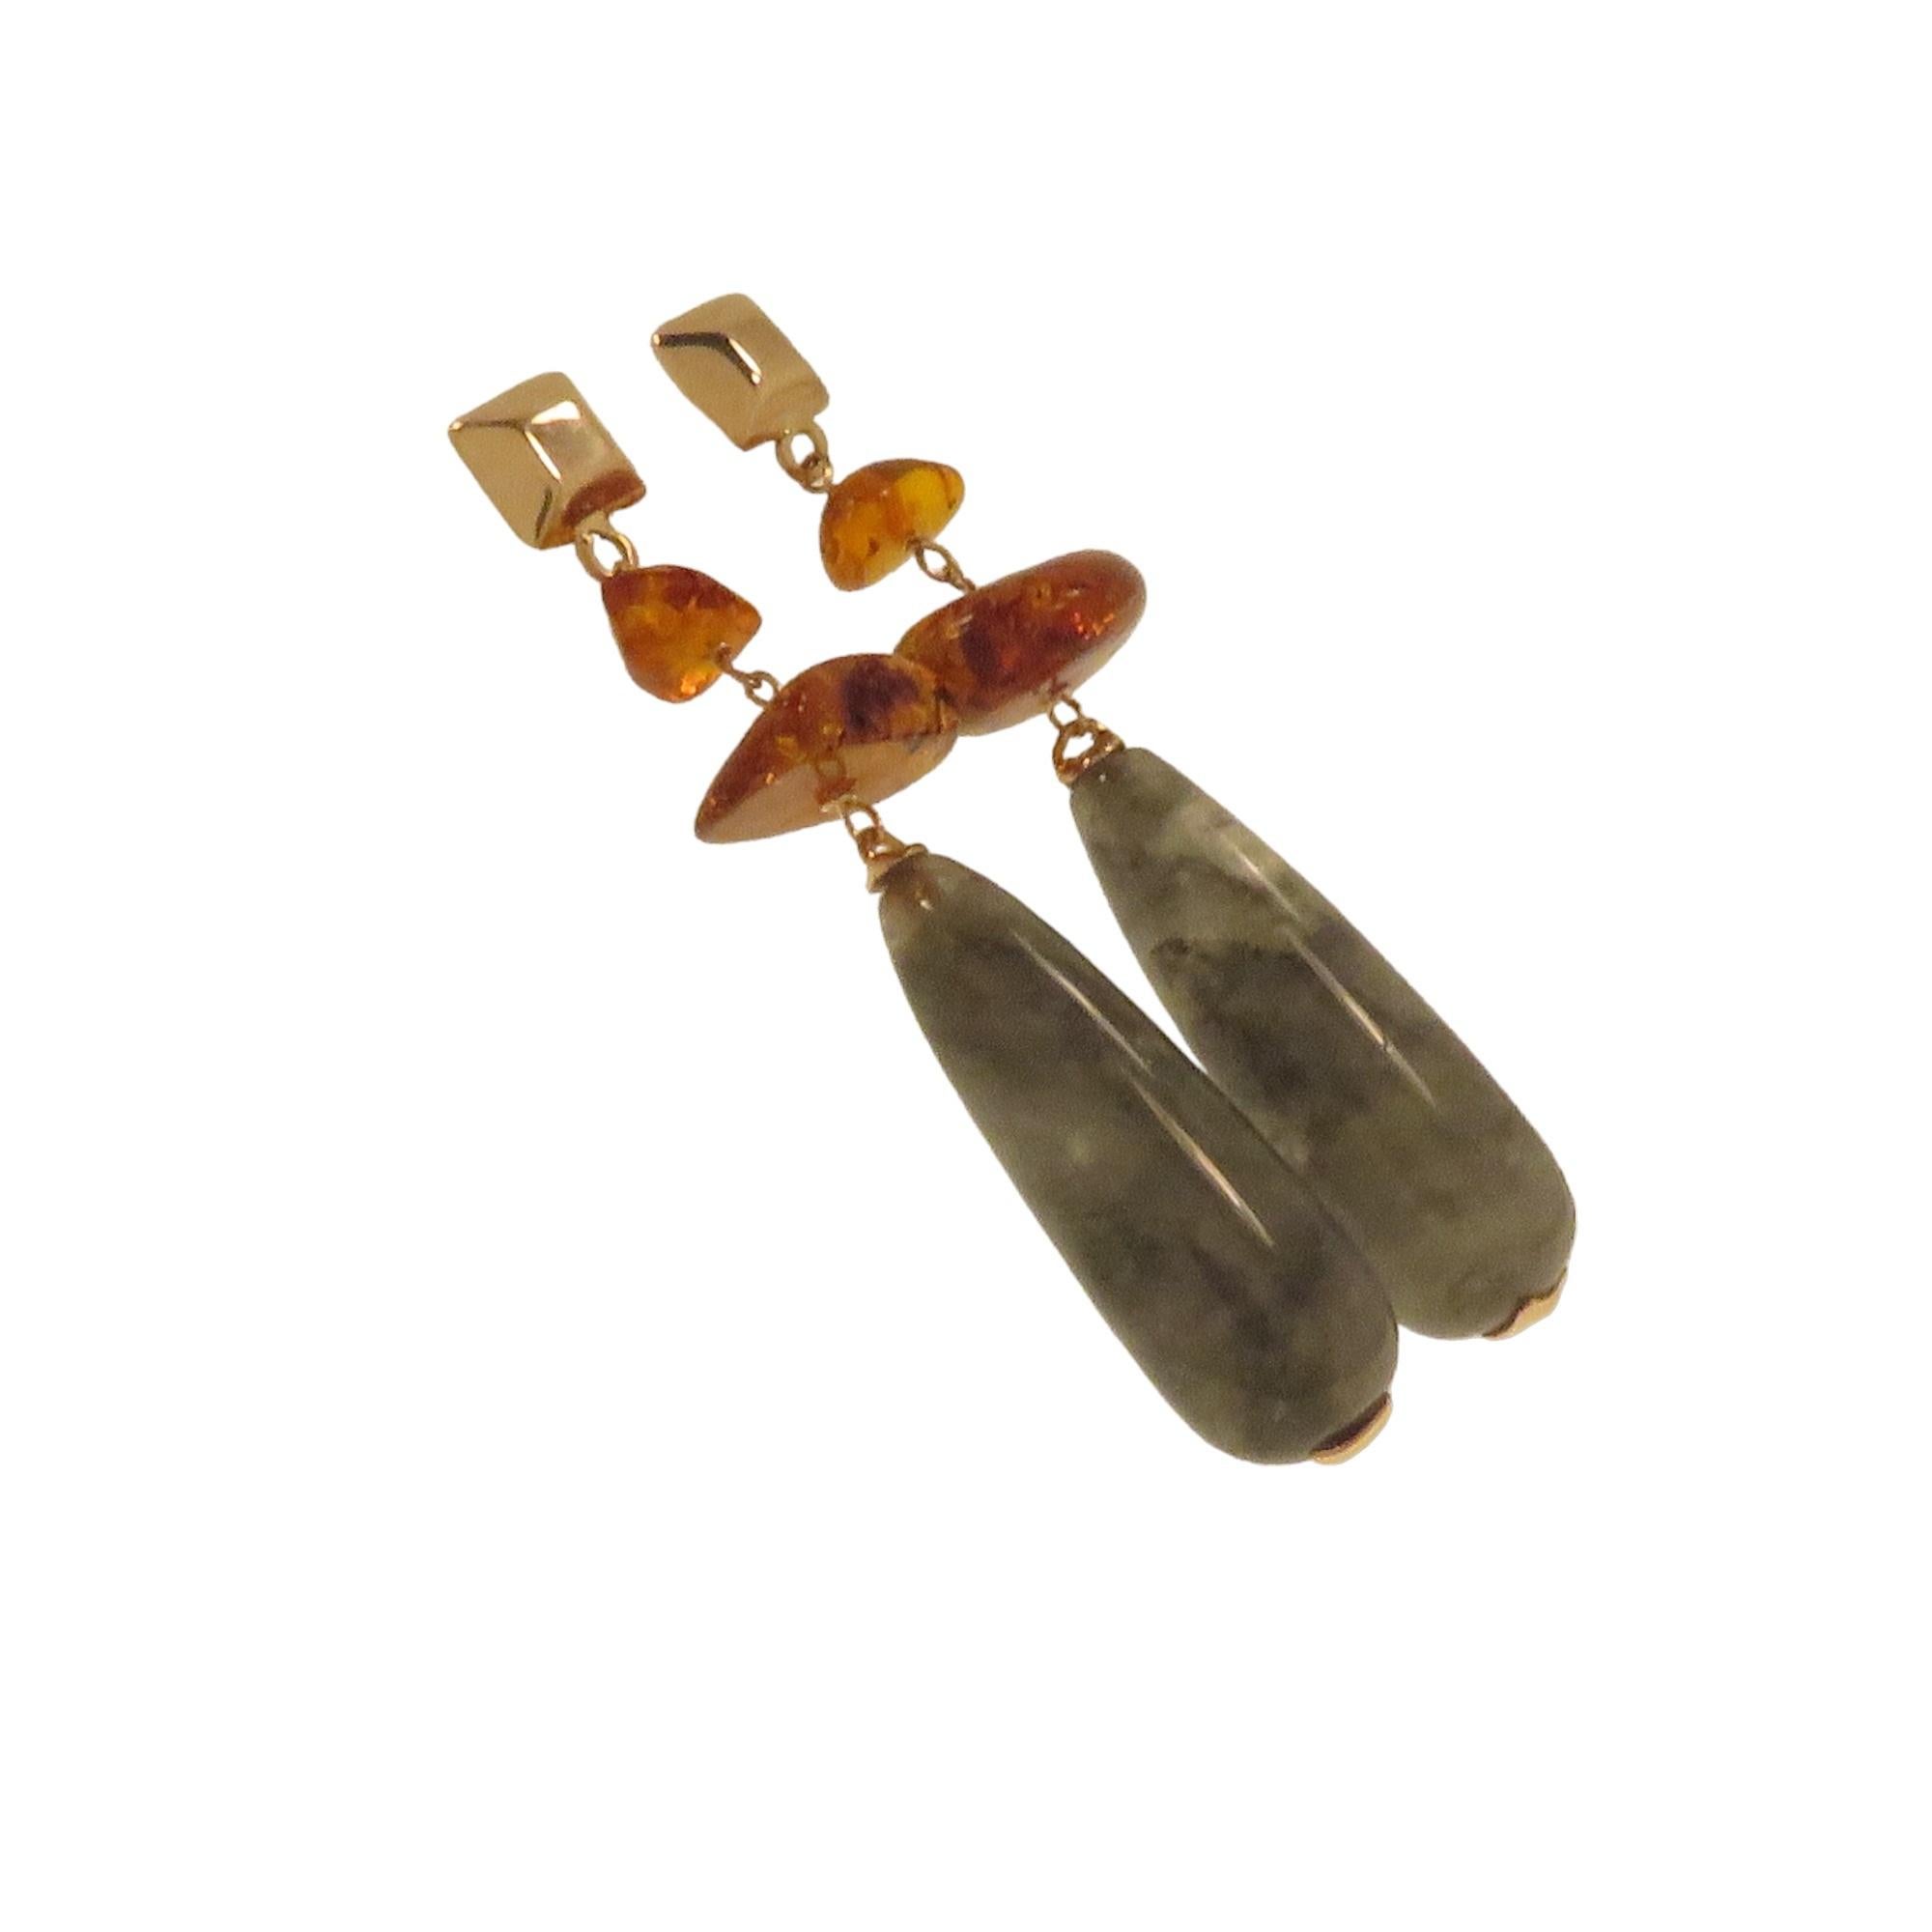 Pretty 9k rose gold earrings handmade in our Milan workshop. The earrings consist of a square facet lobe element with a pin and butterfly clasp, underneath two natural amber elements, and lastly two slender drops of gray agate. The earrings have the